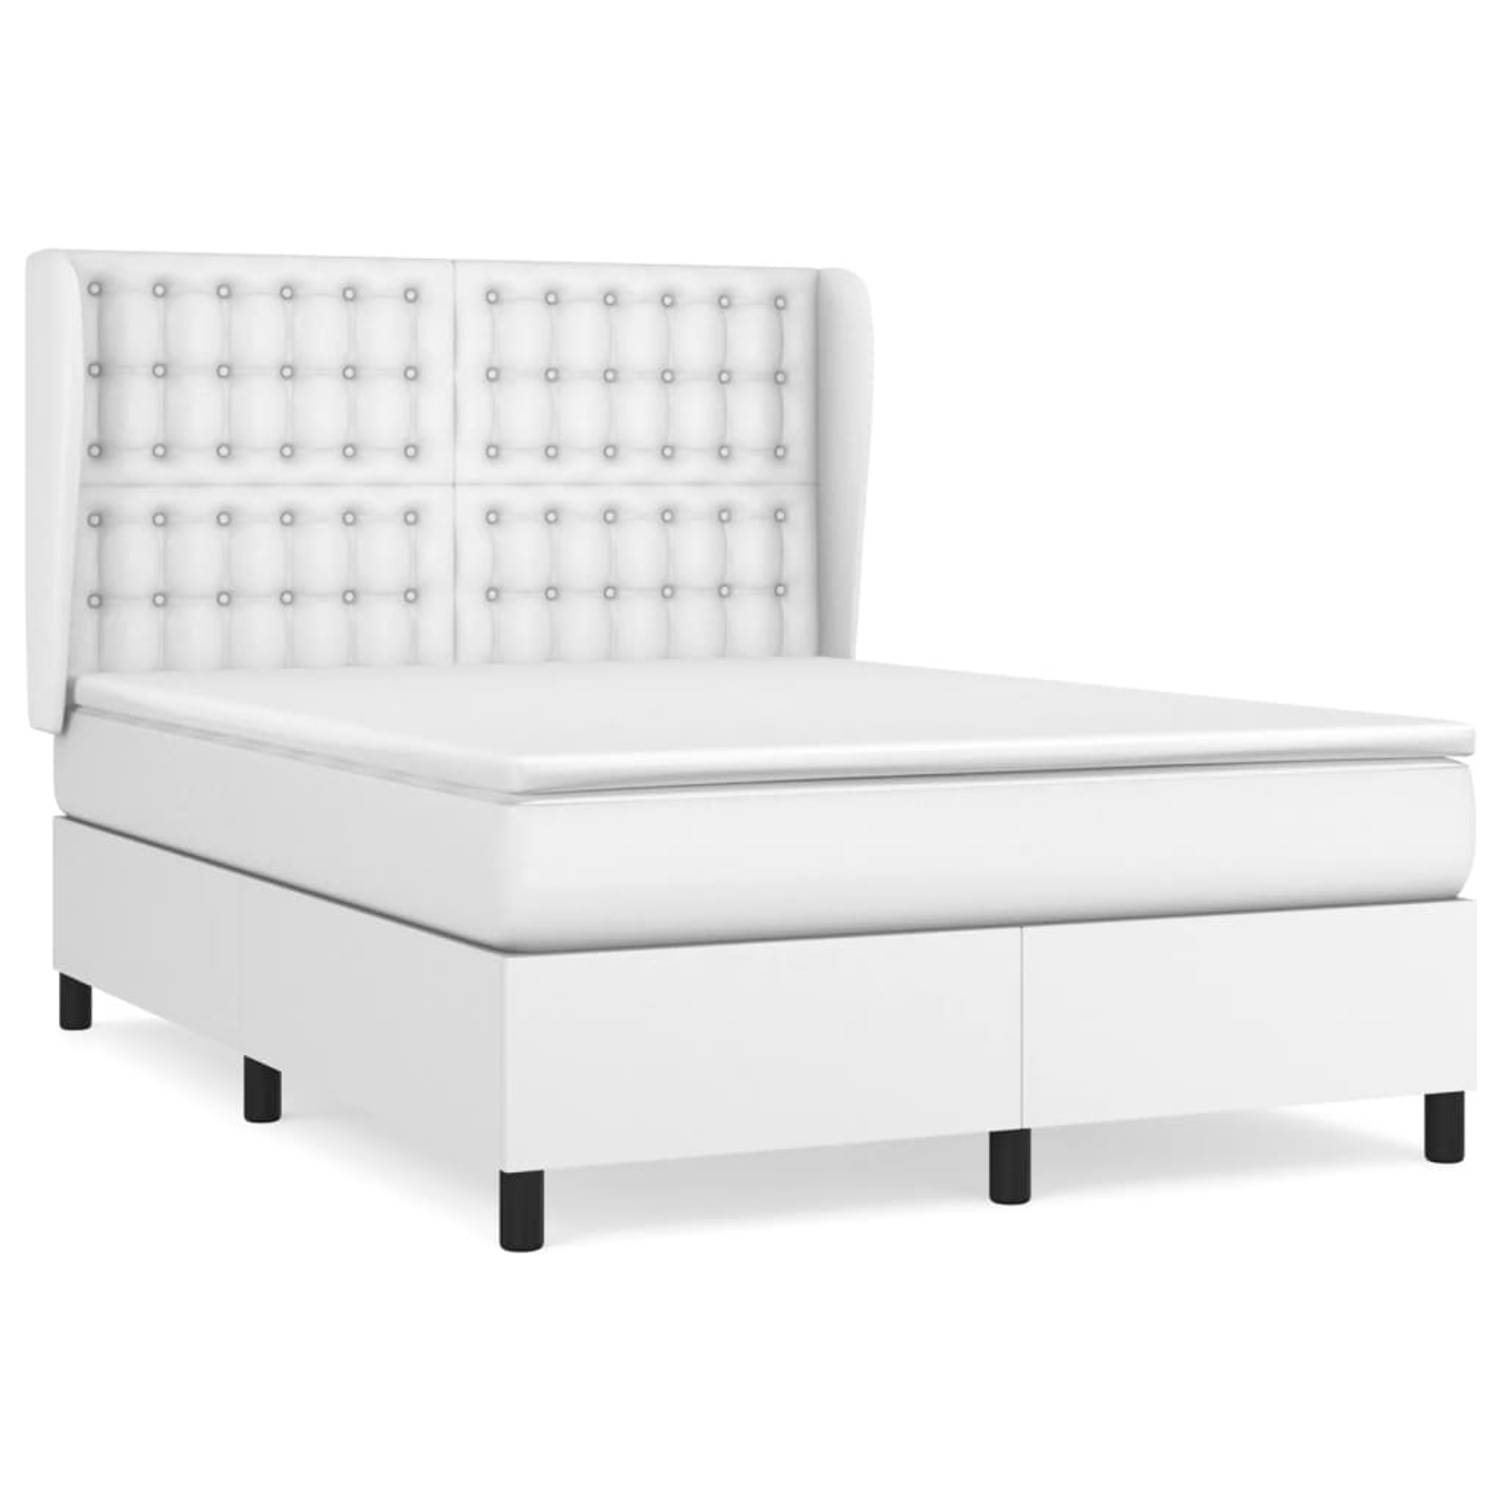 The Living Store Boxspringbed - Comfort - Bed - 140 x 200 cm - Kunstleer